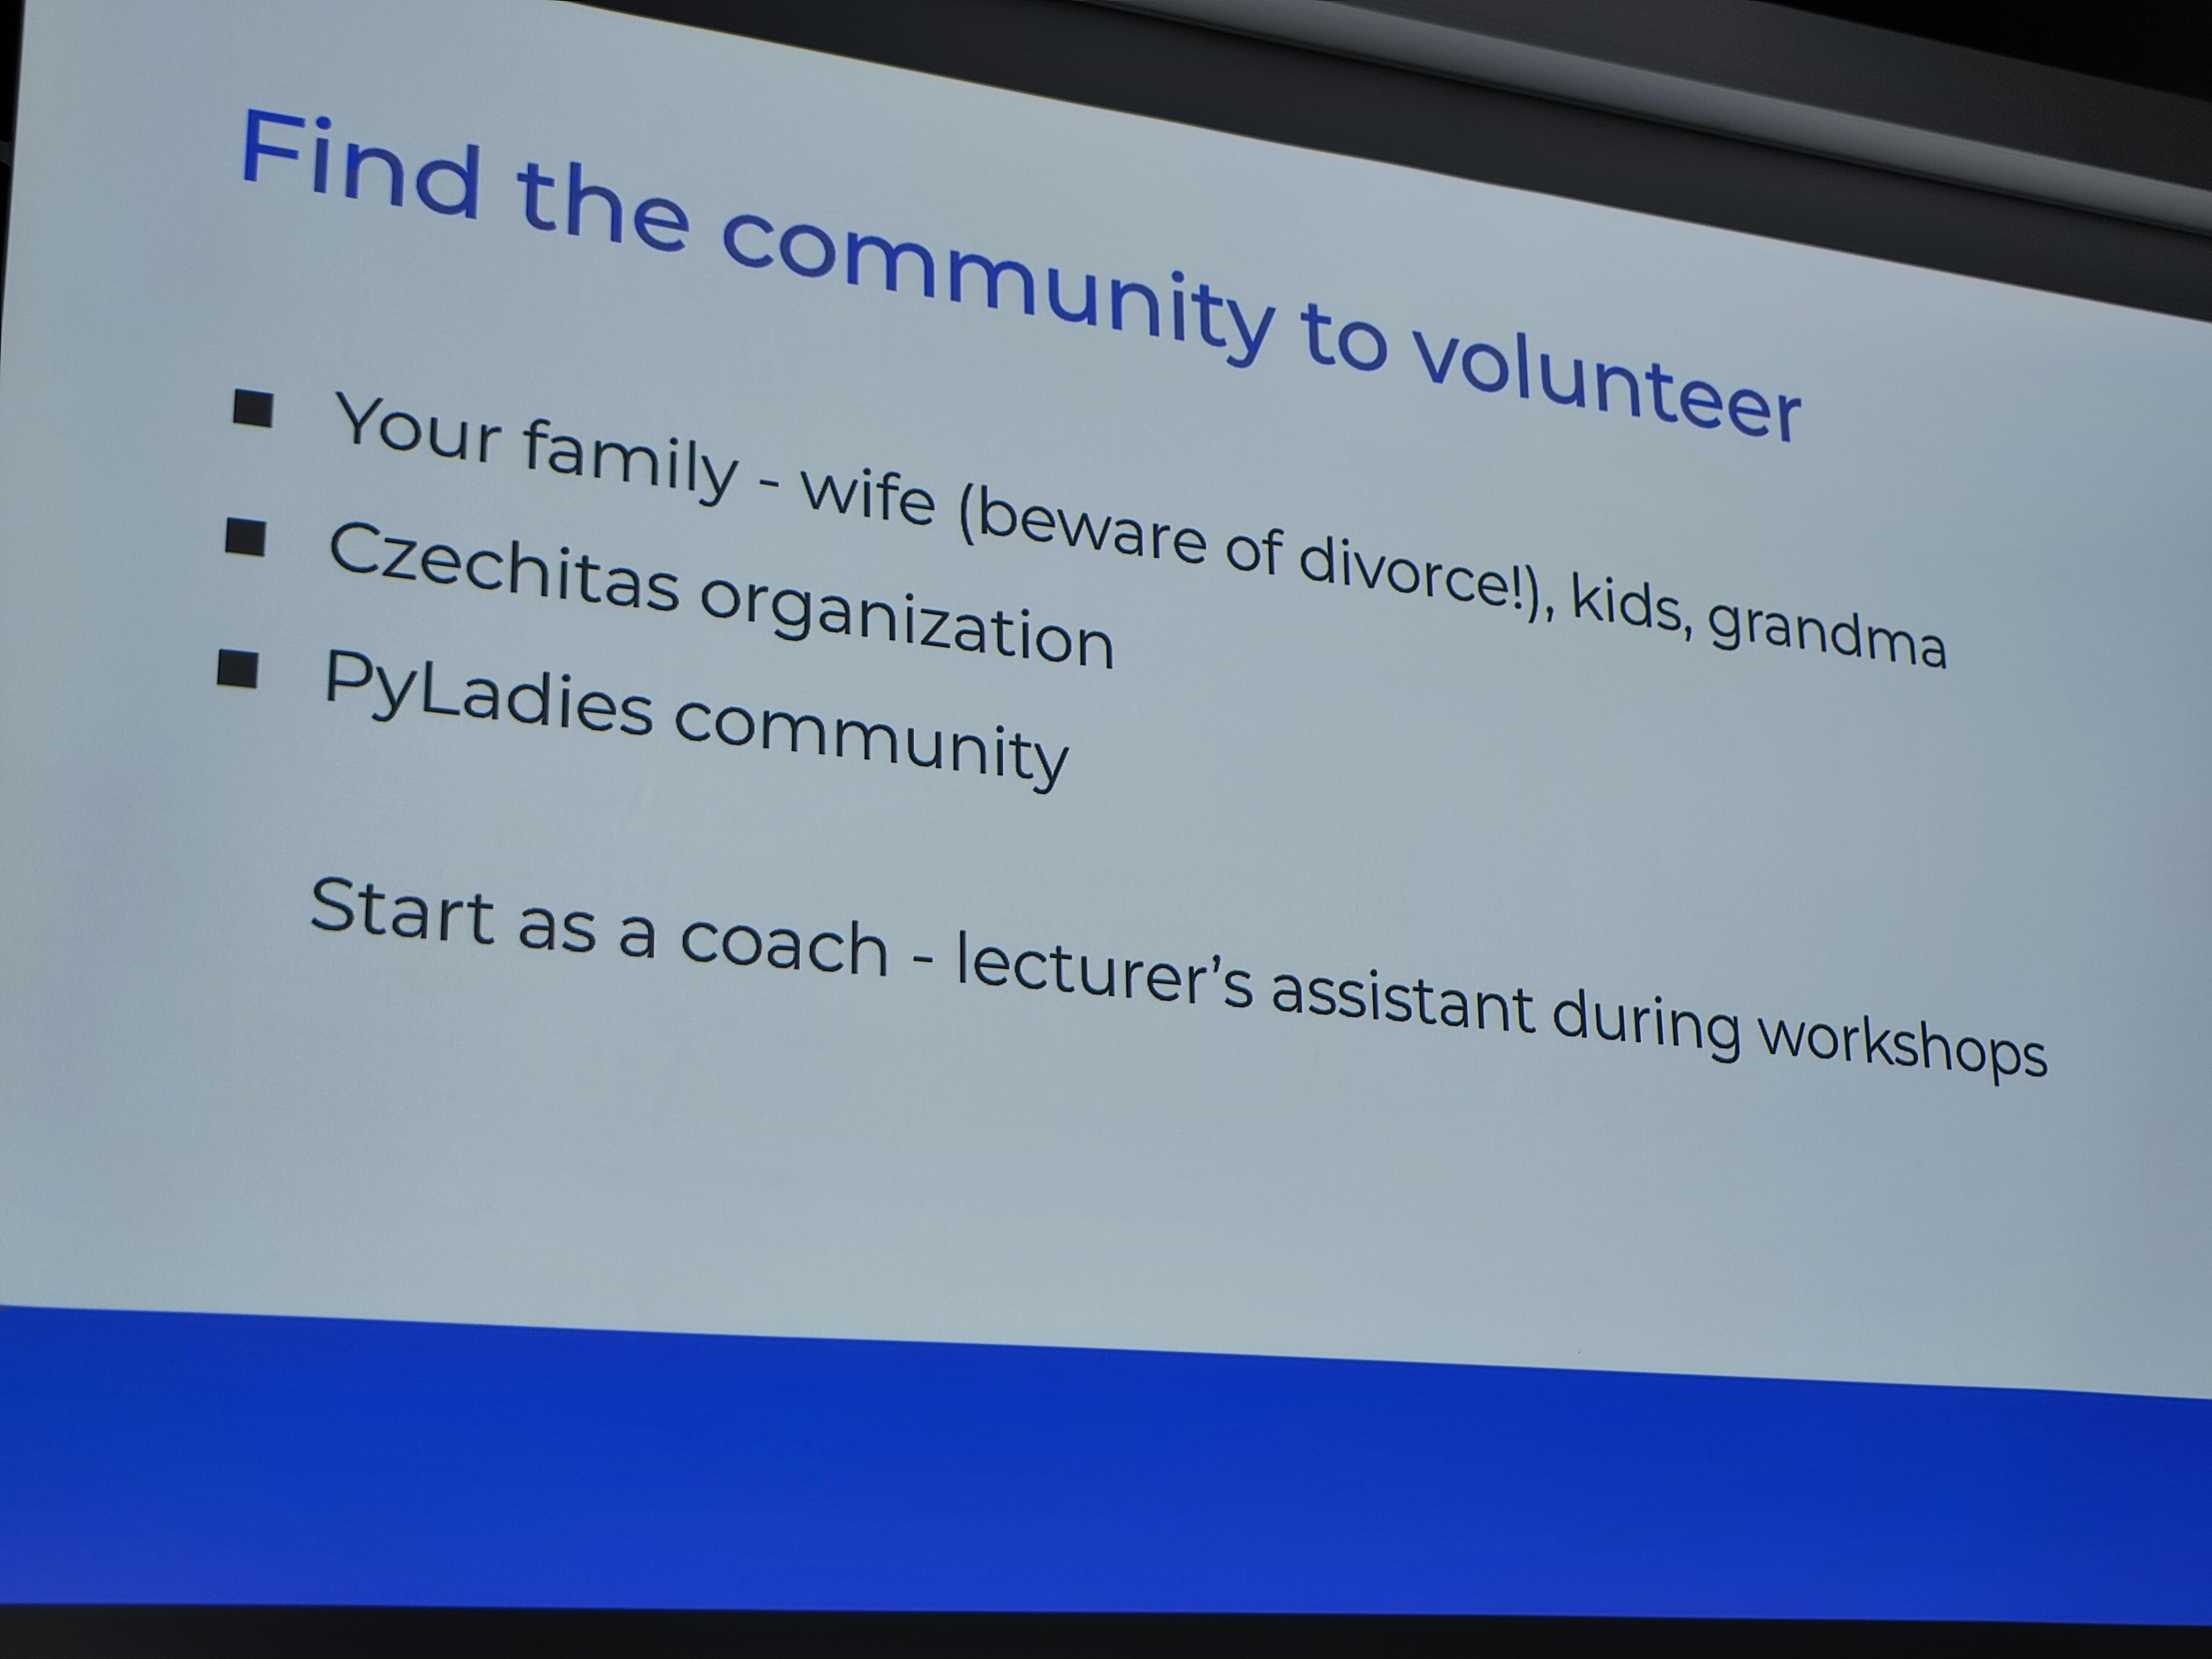 Find the community to volunteer